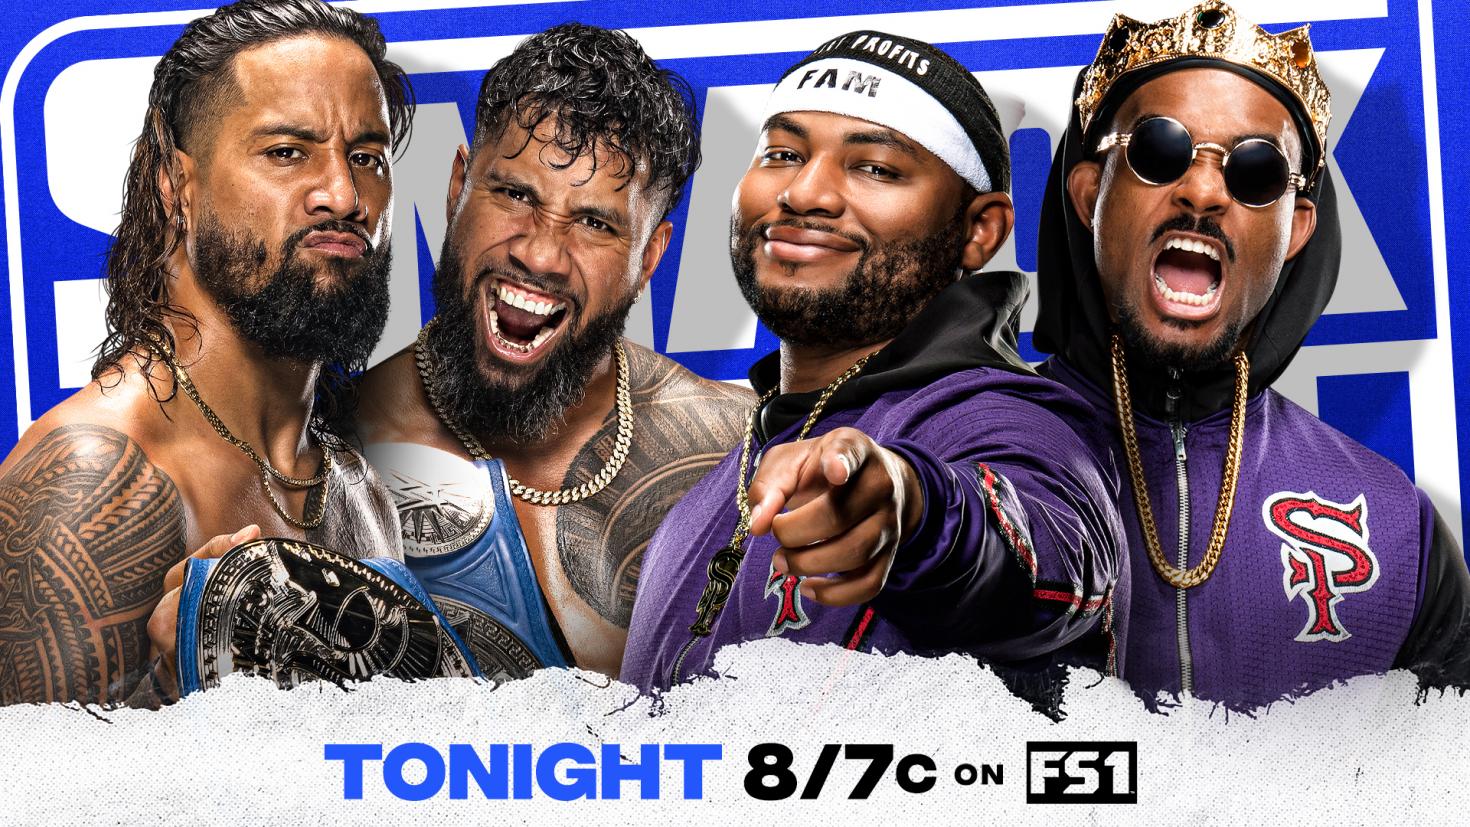 The Usos to defend tag titles against The Street Profits on SmackDown.